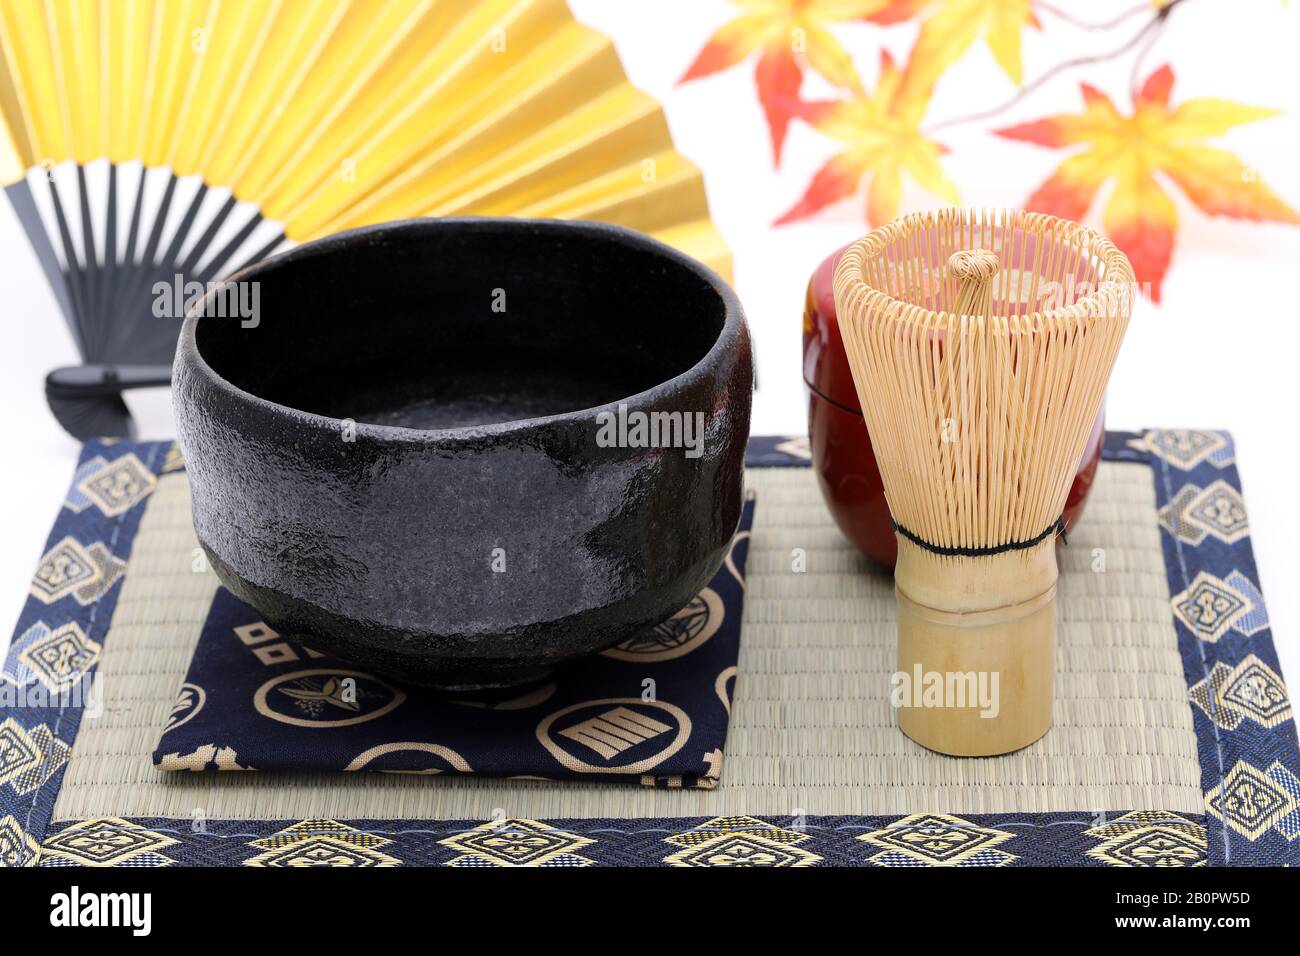 Tea bowl with tea whisk used in Japanese matcha green tea ceremony on white hackgrond Stock Photo